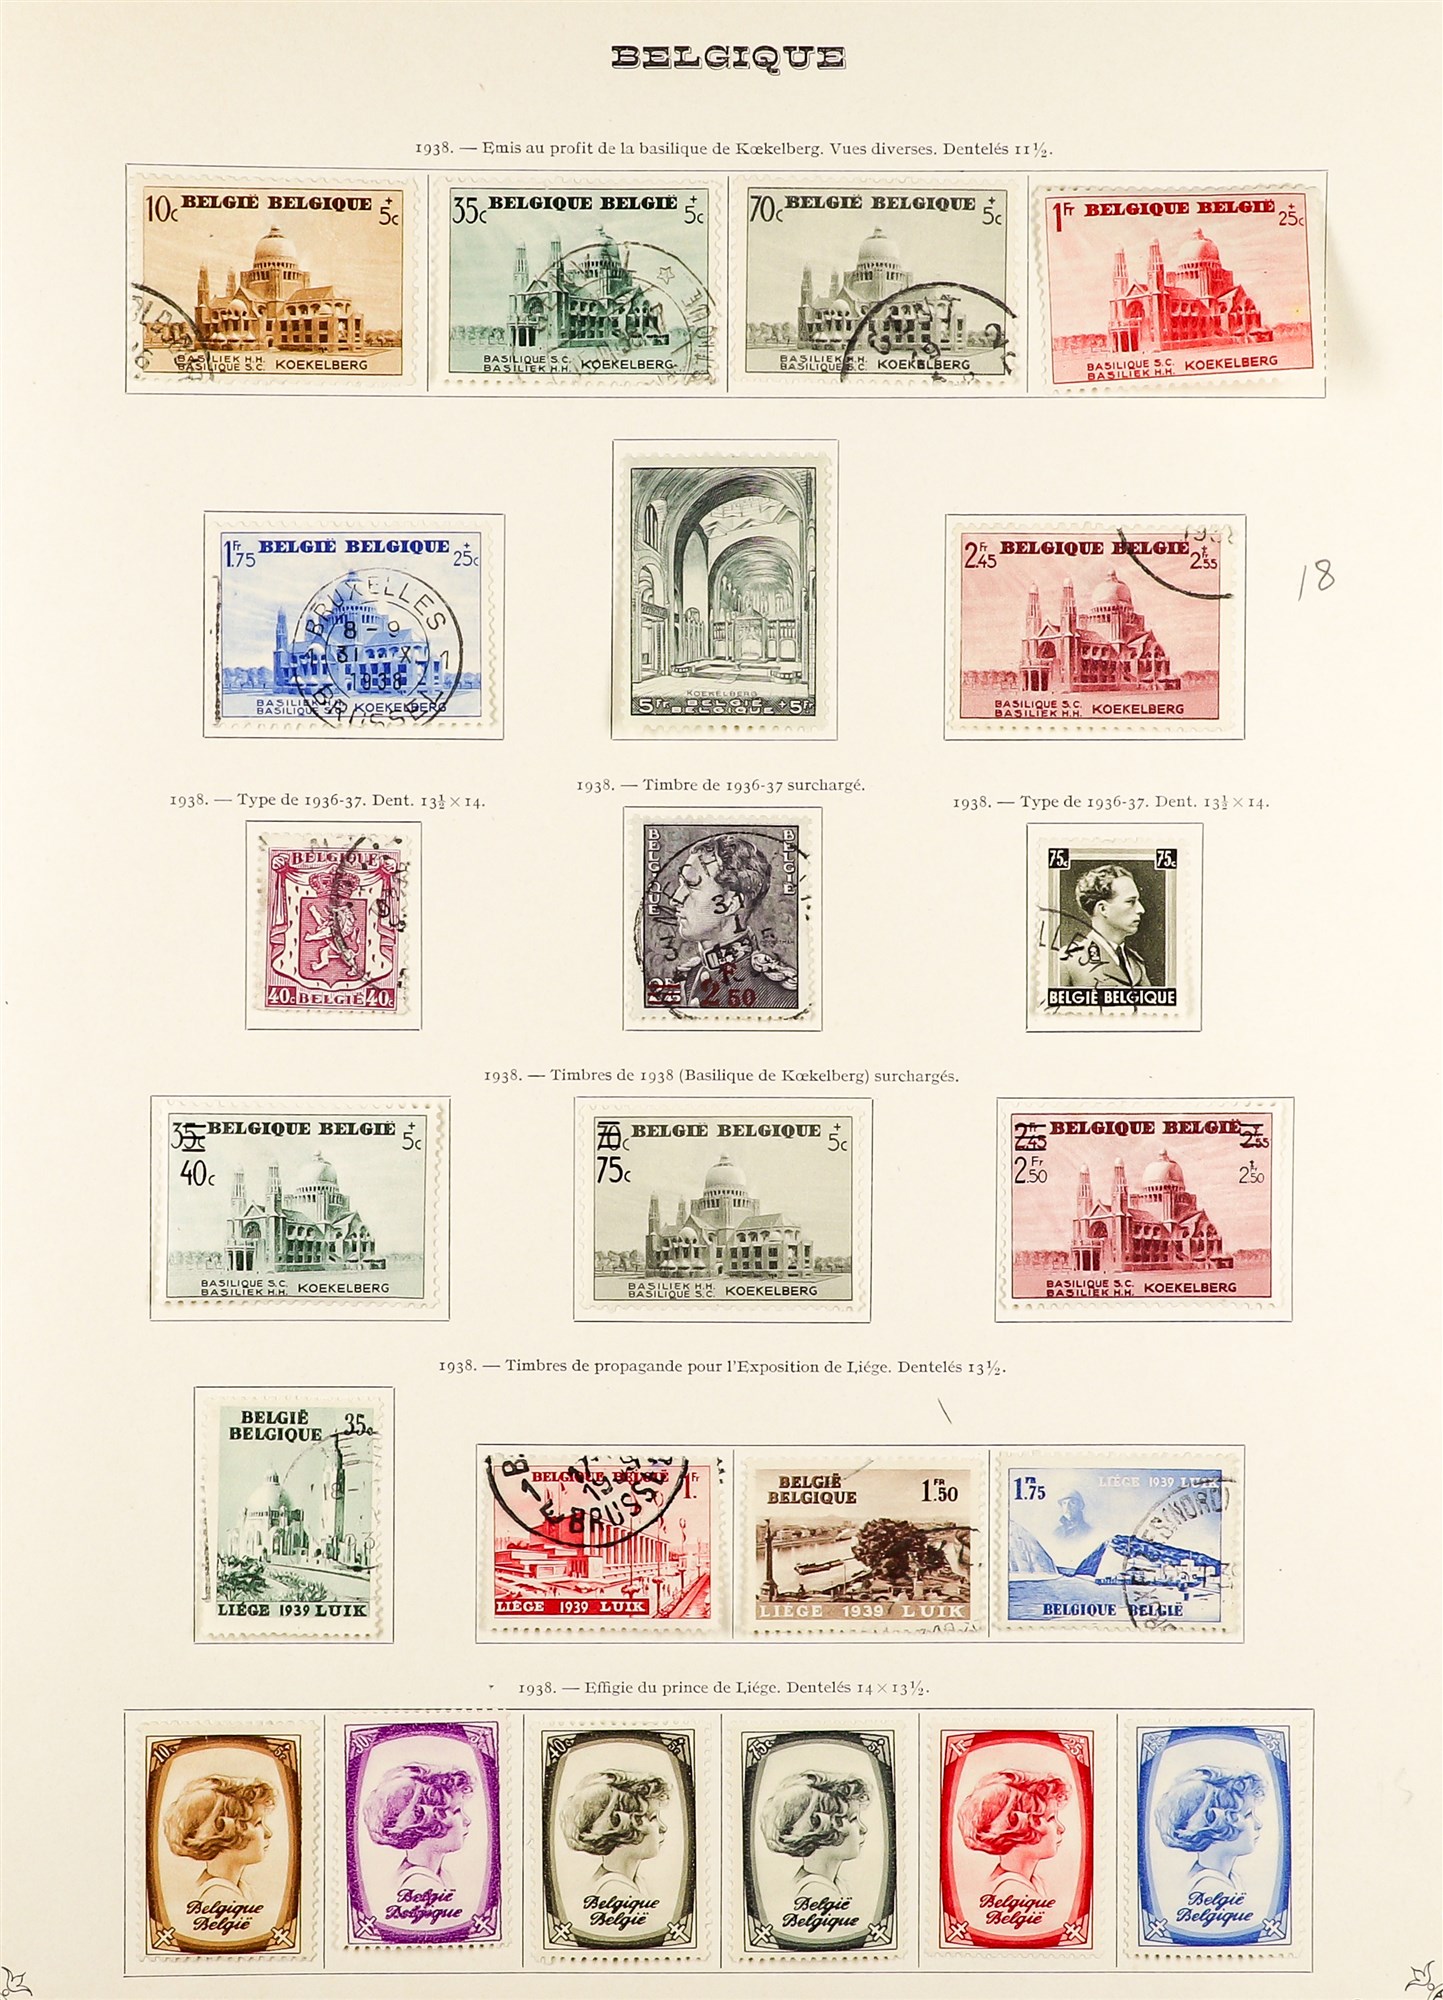 BELGIUM 1849 - 1942 COLLECTION of around 700 chiefly used stamps on album pages, comprehensive - Image 24 of 40